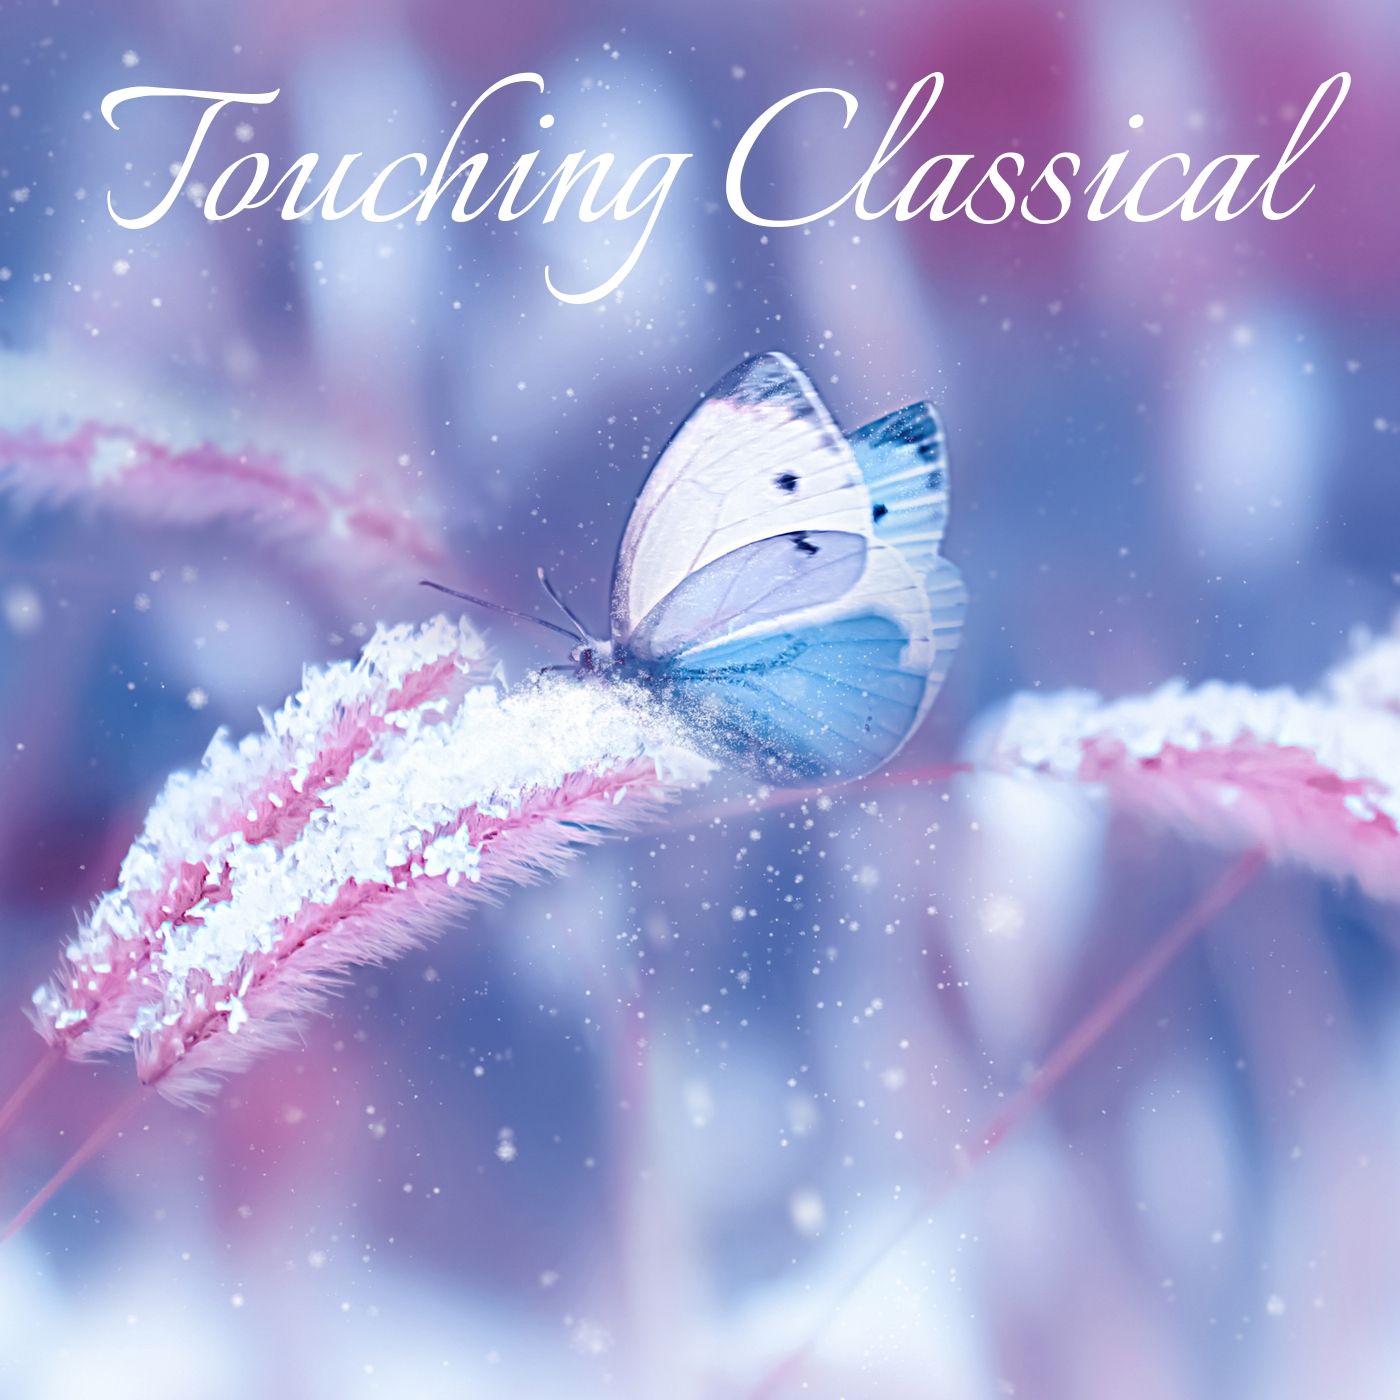 Emotional, Touching Classical Music